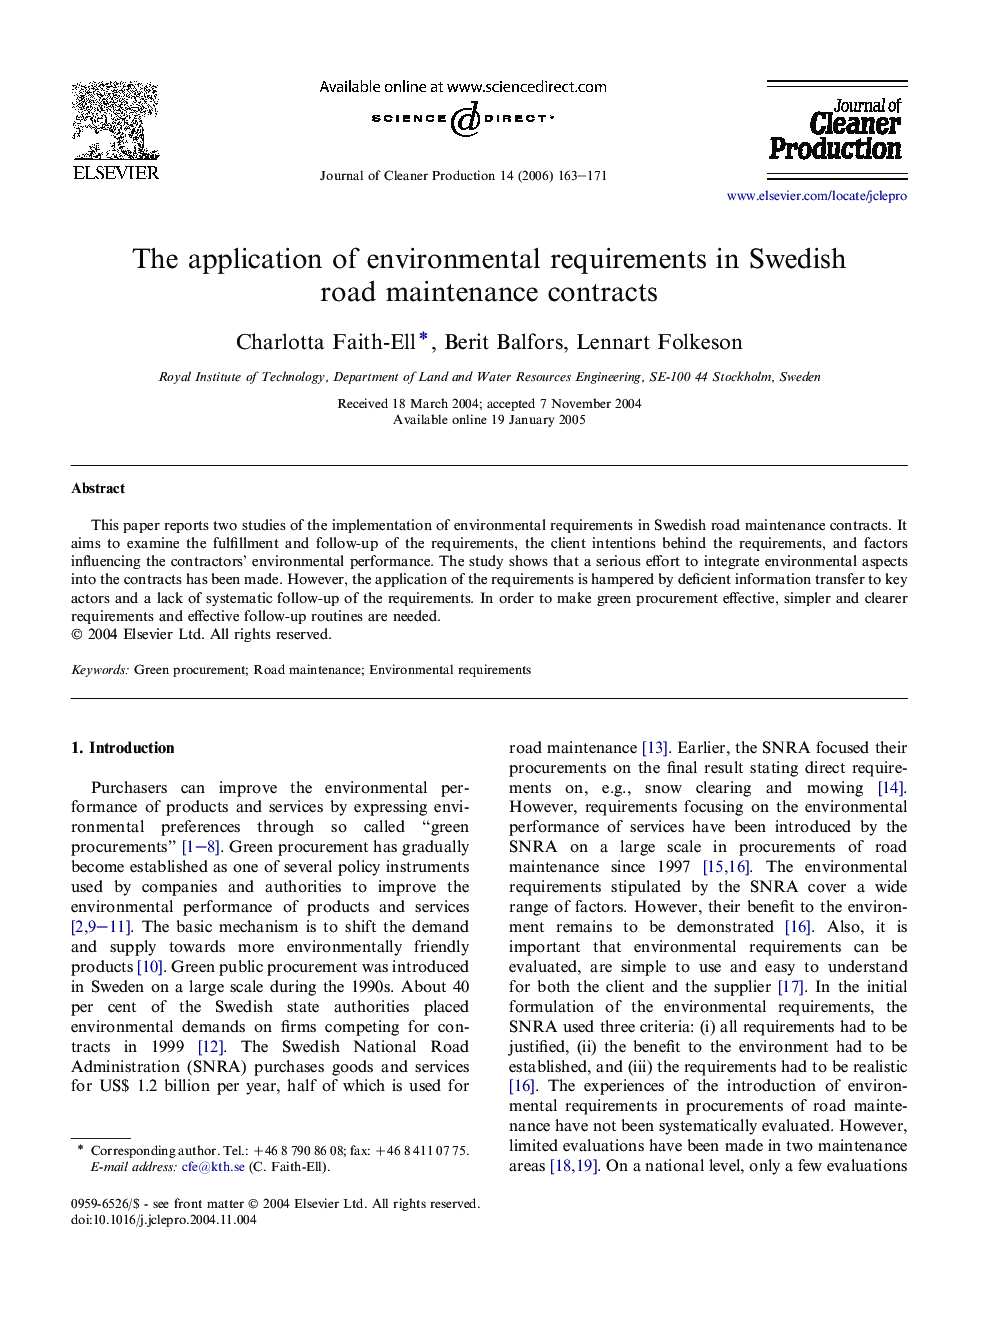 The application of environmental requirements in Swedish road maintenance contracts